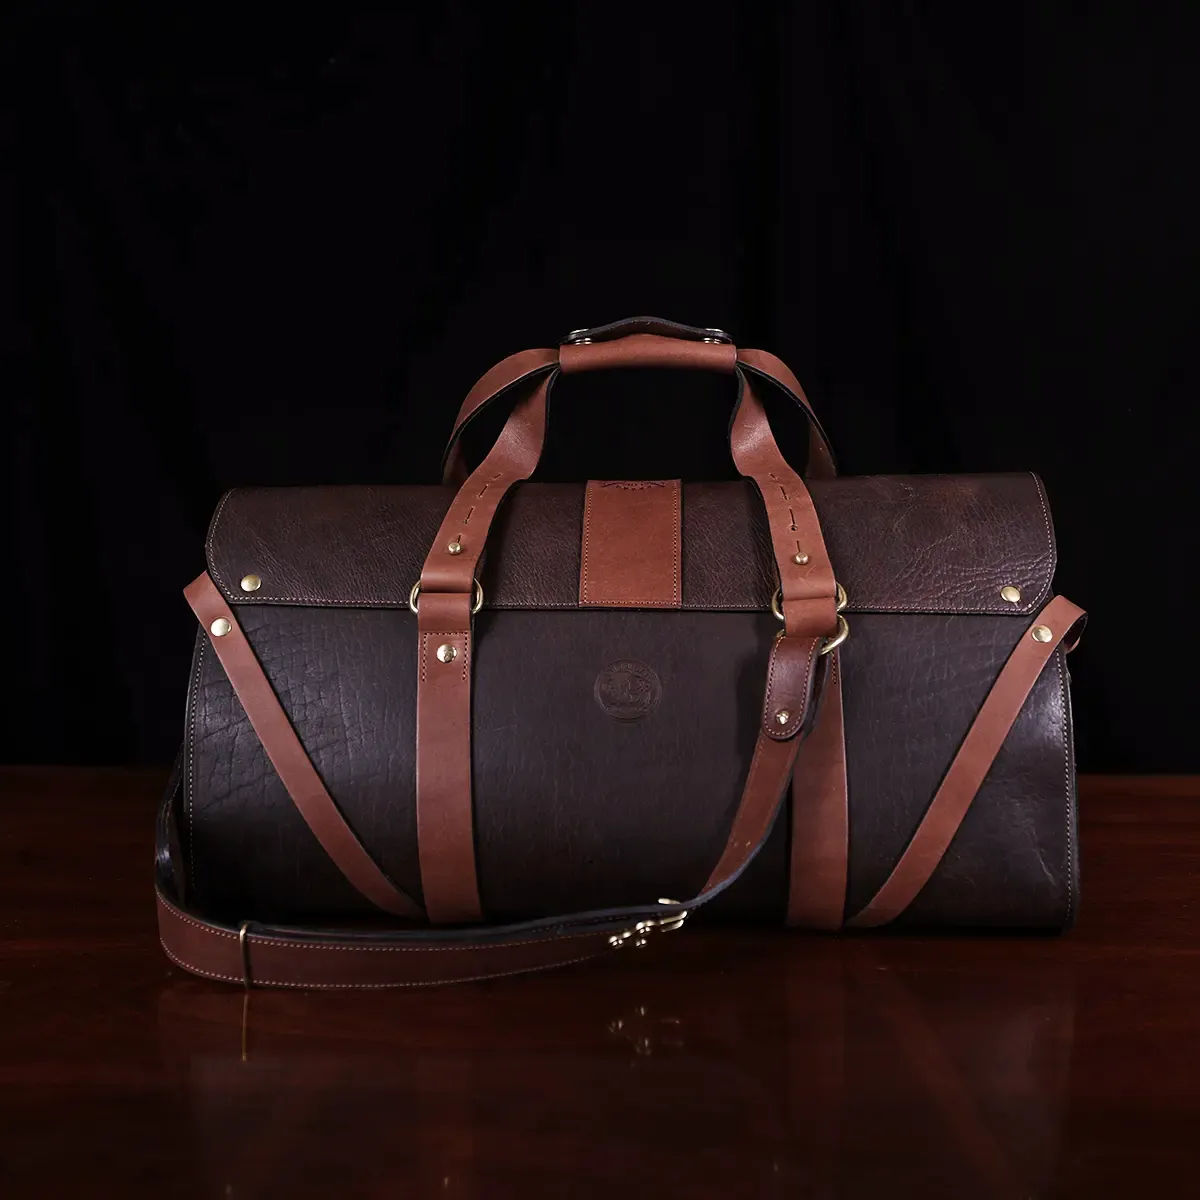 leather no 1 grip travel bag in tobacco brown american buffalo showing the back